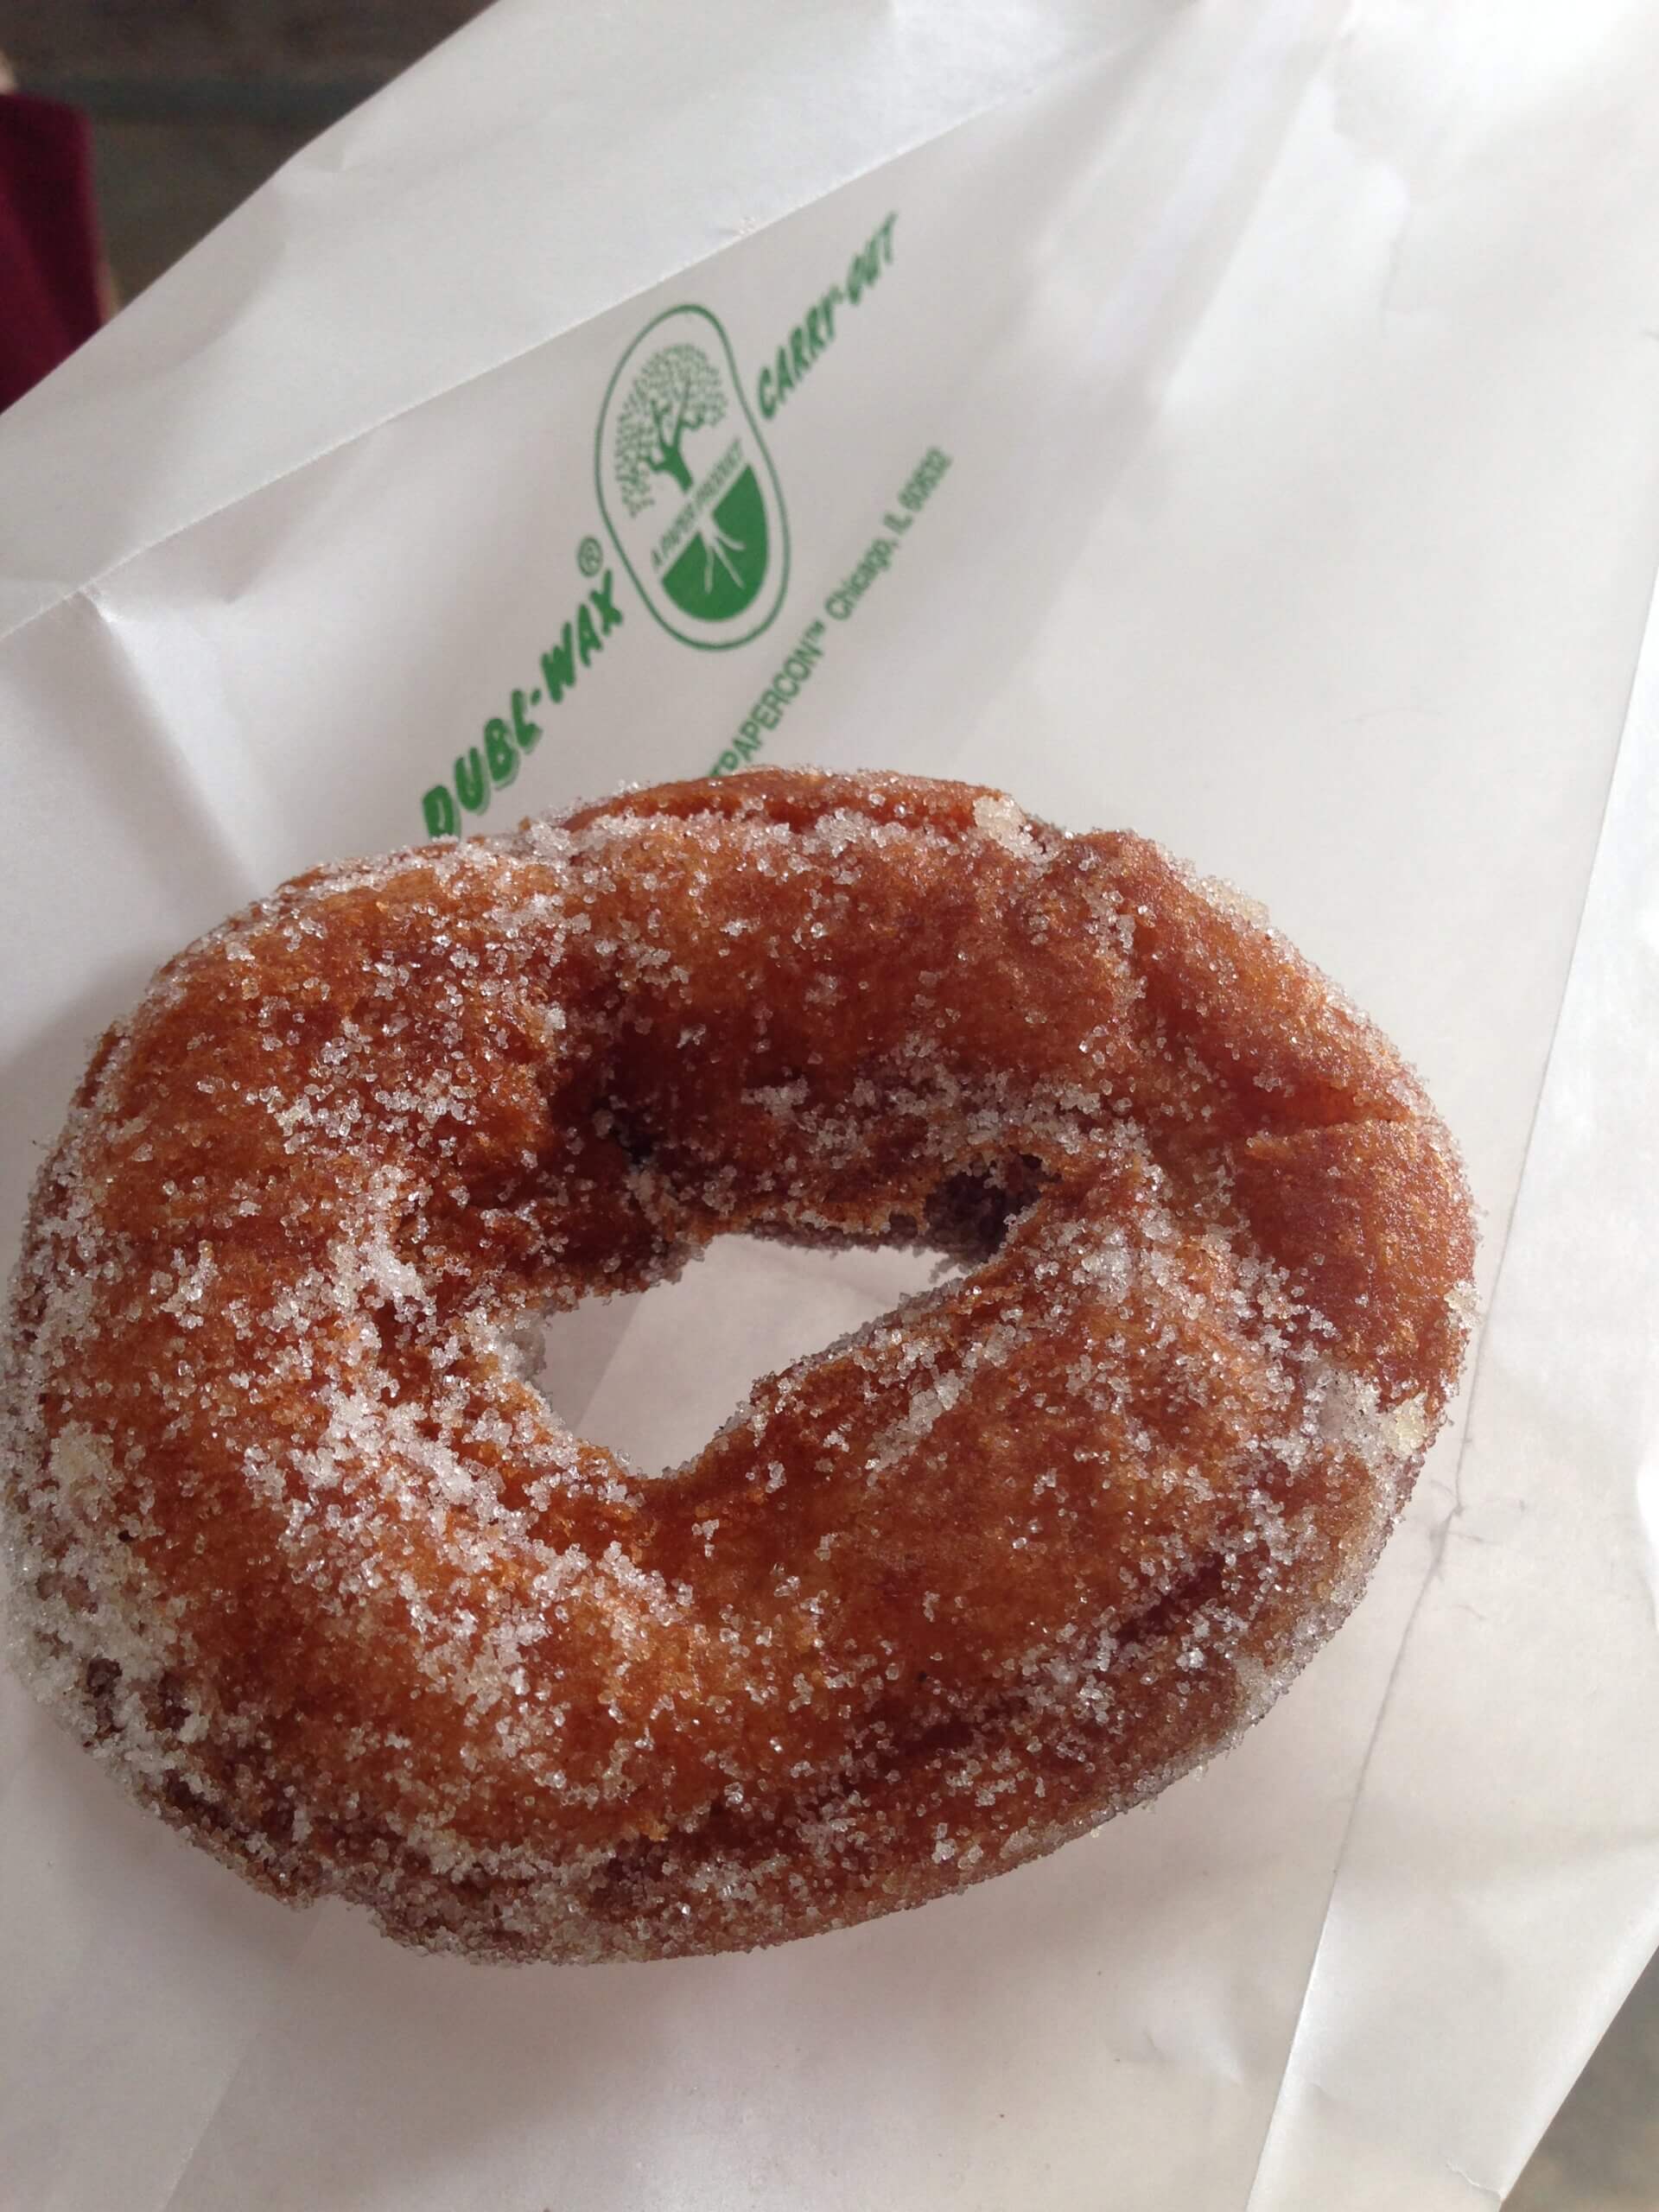 Delicious fresh donuts at Apple Hill